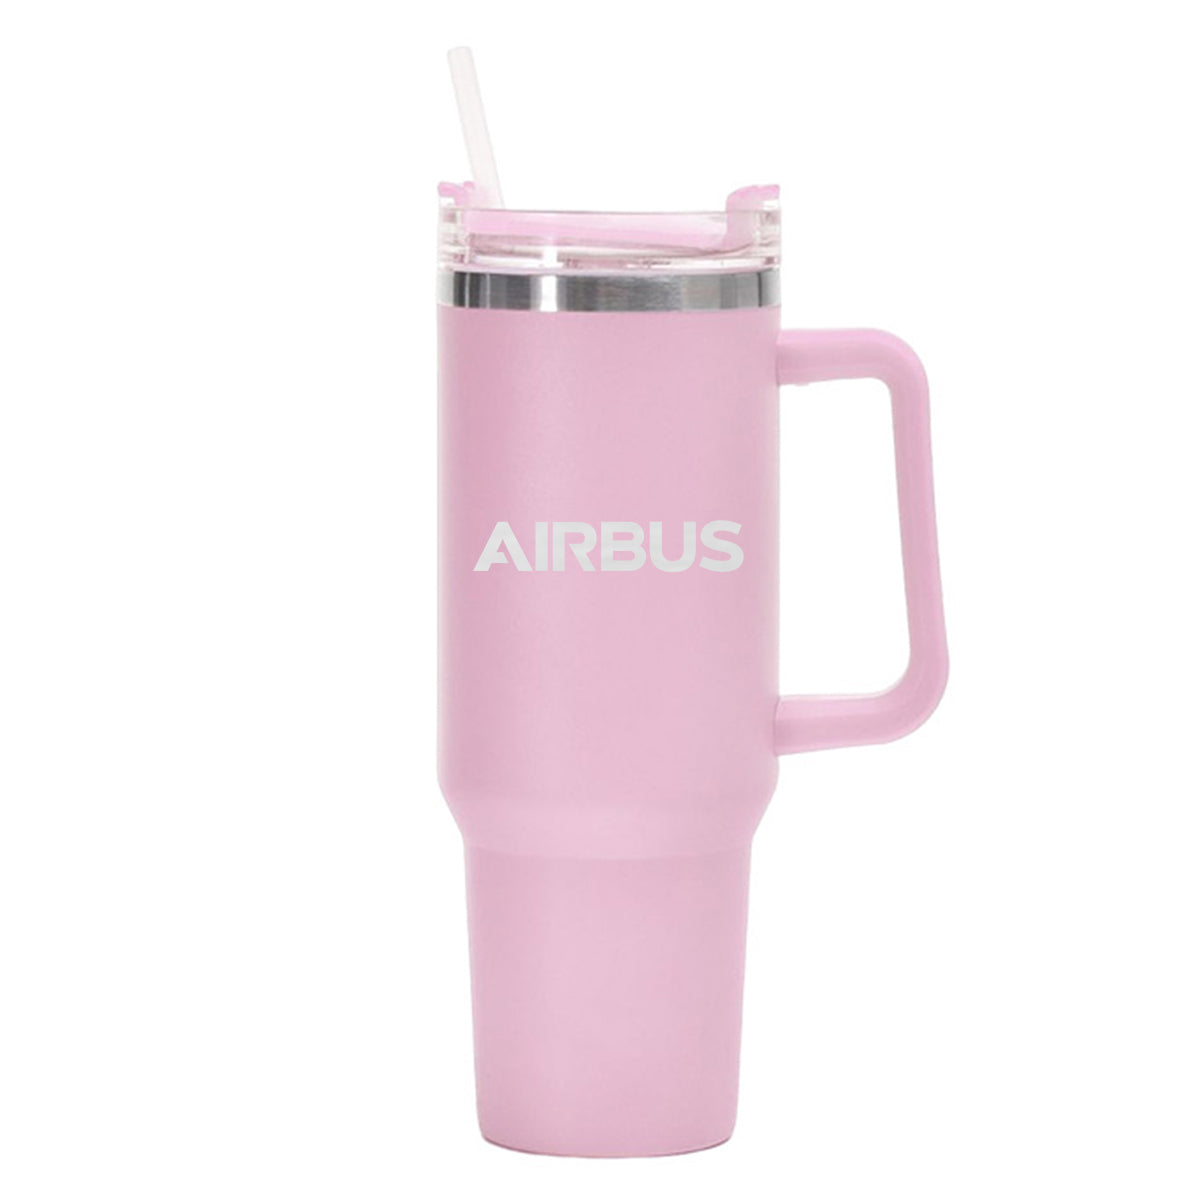 Airbus & Text Designed 40oz Stainless Steel Car Mug With Holder